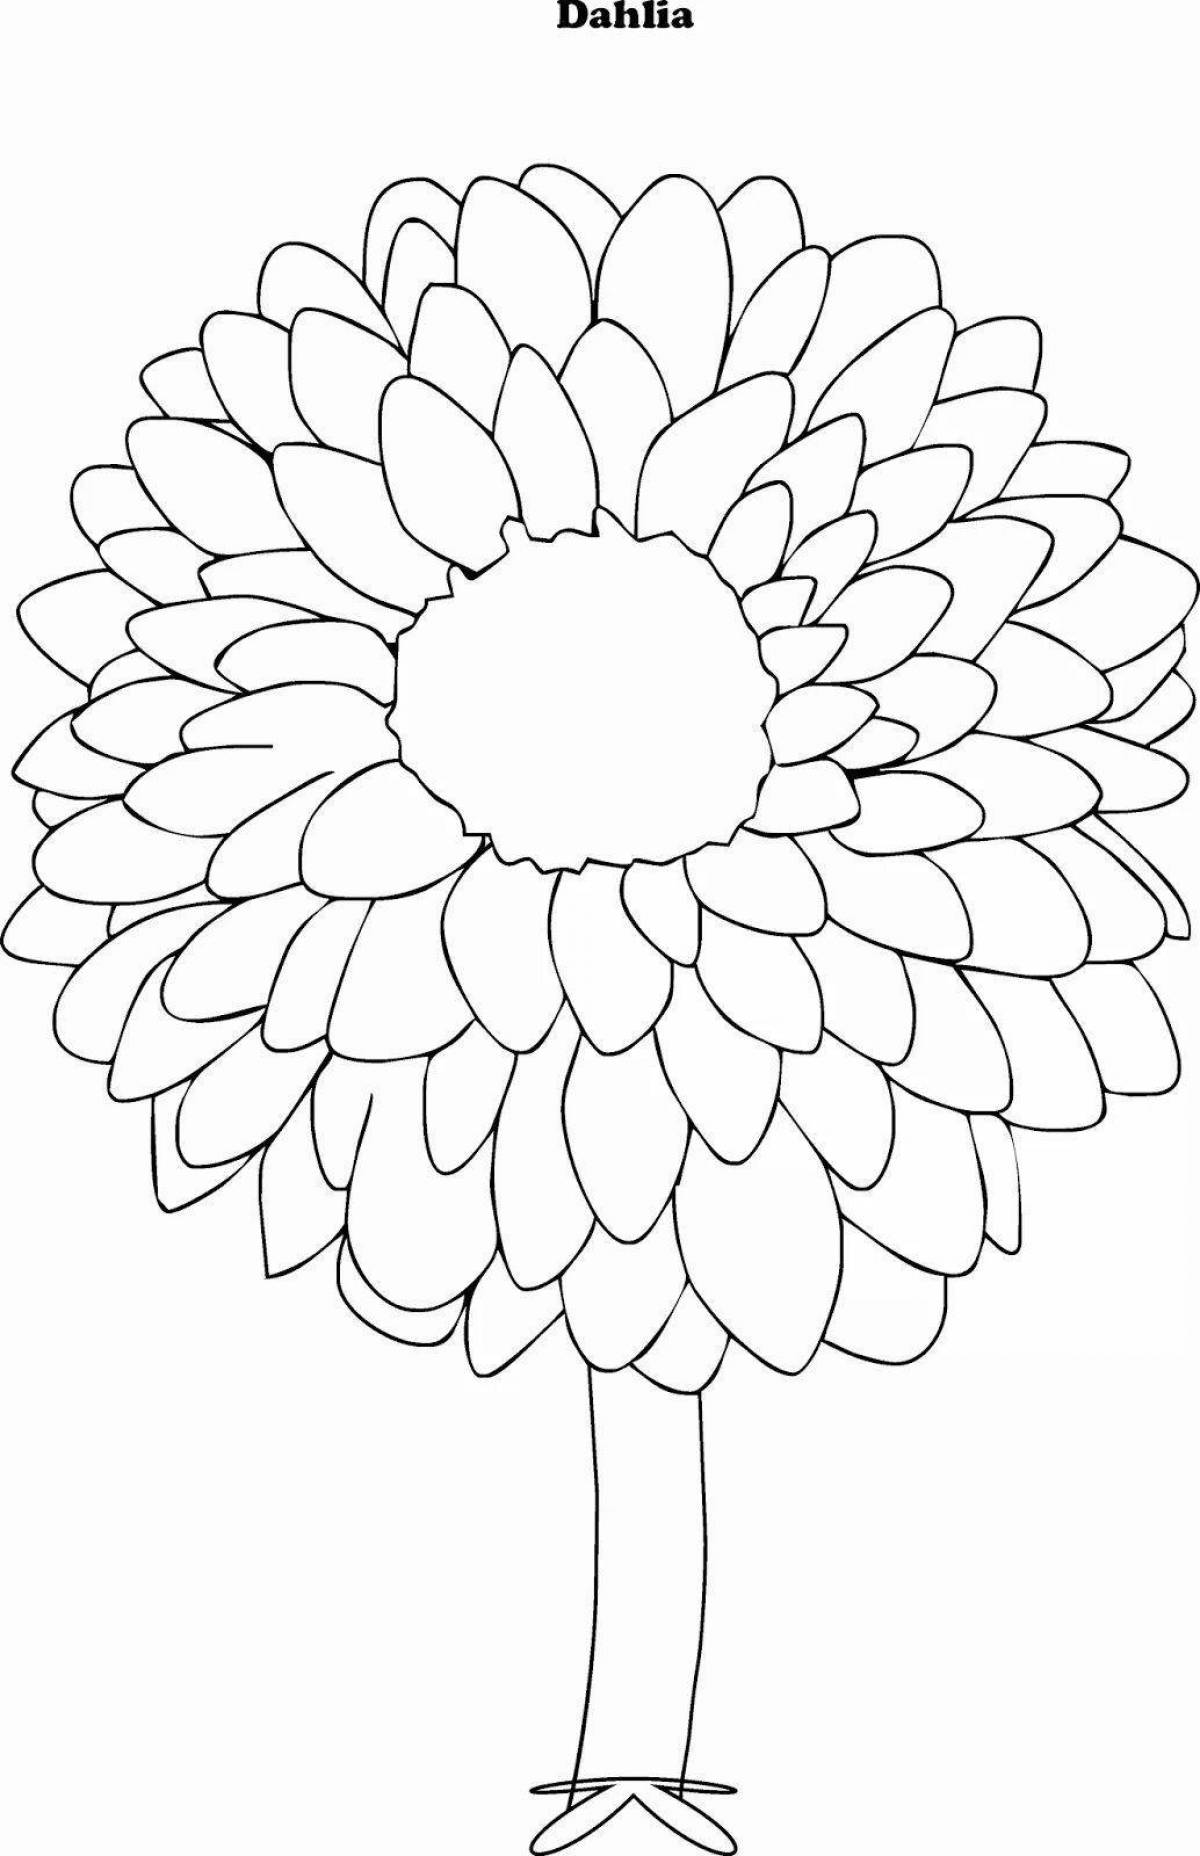 Coloring page charming dahlia